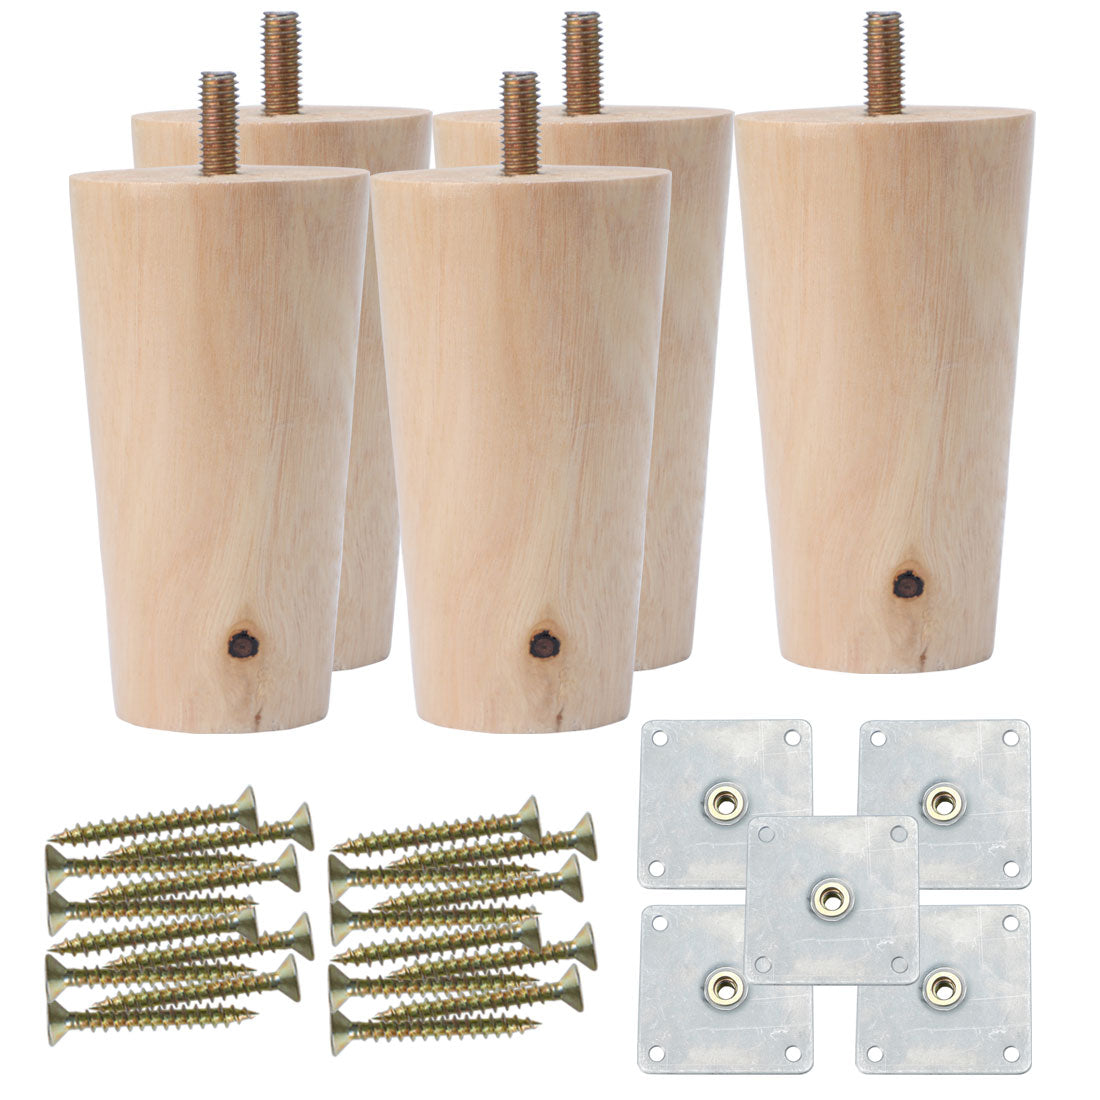 uxcell Uxcell Round Solid Wood Furniture Leg Desk Feet Adjuster Replacement Set of 5